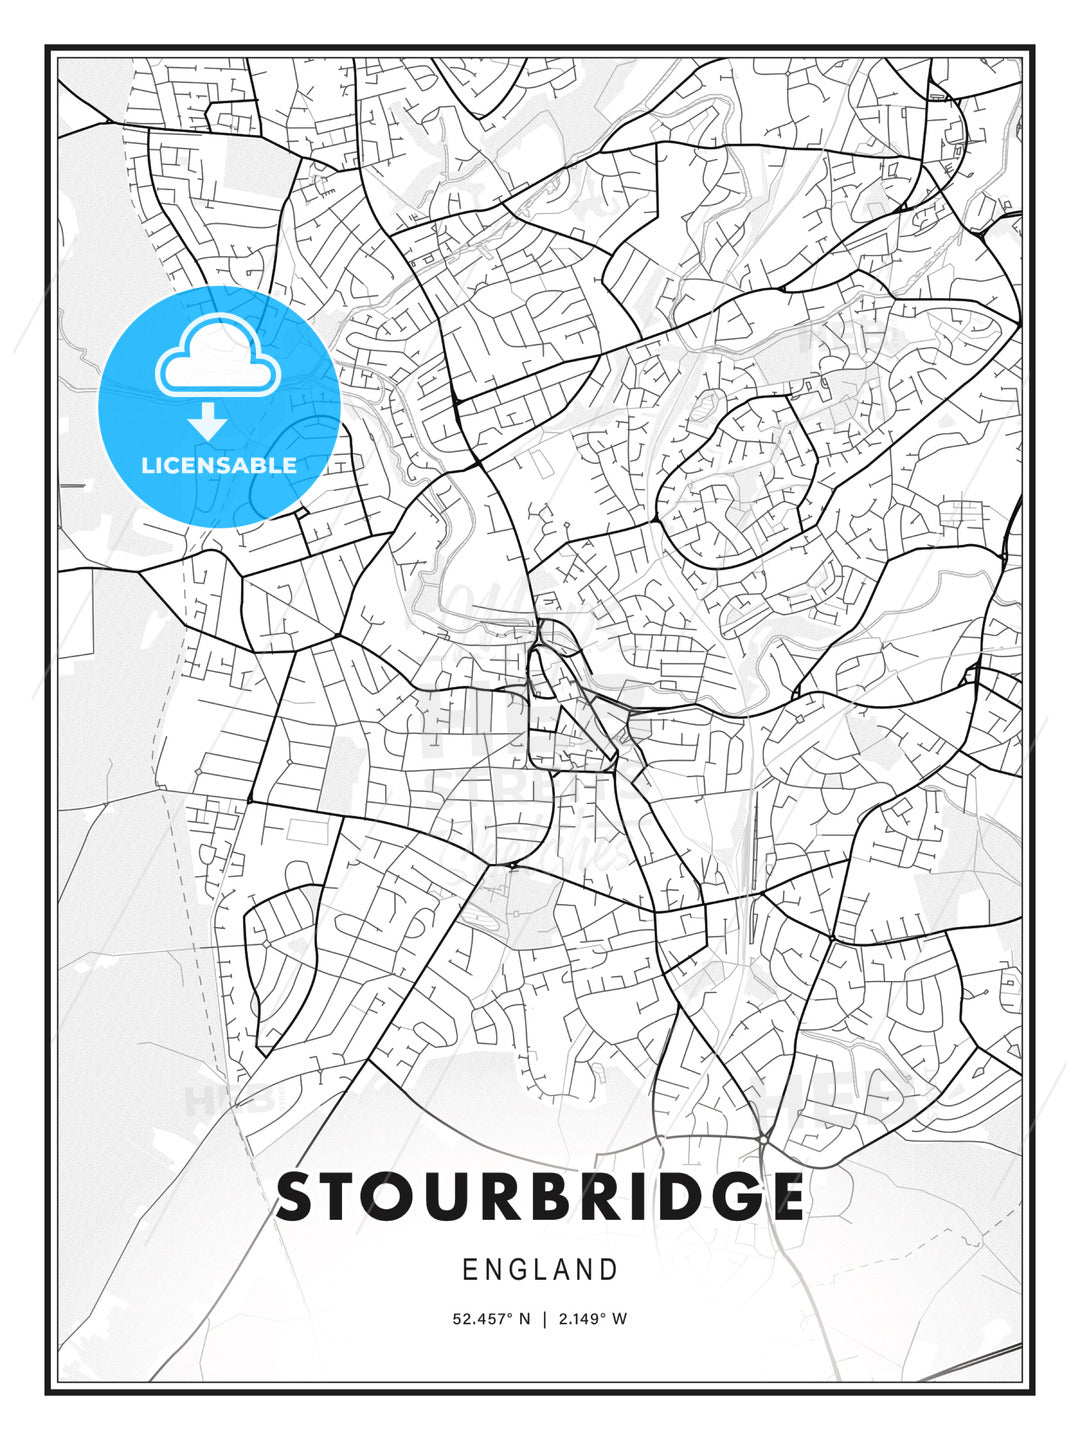 Stourbridge, England, Modern Print Template in Various Formats - HEBSTREITS Sketches